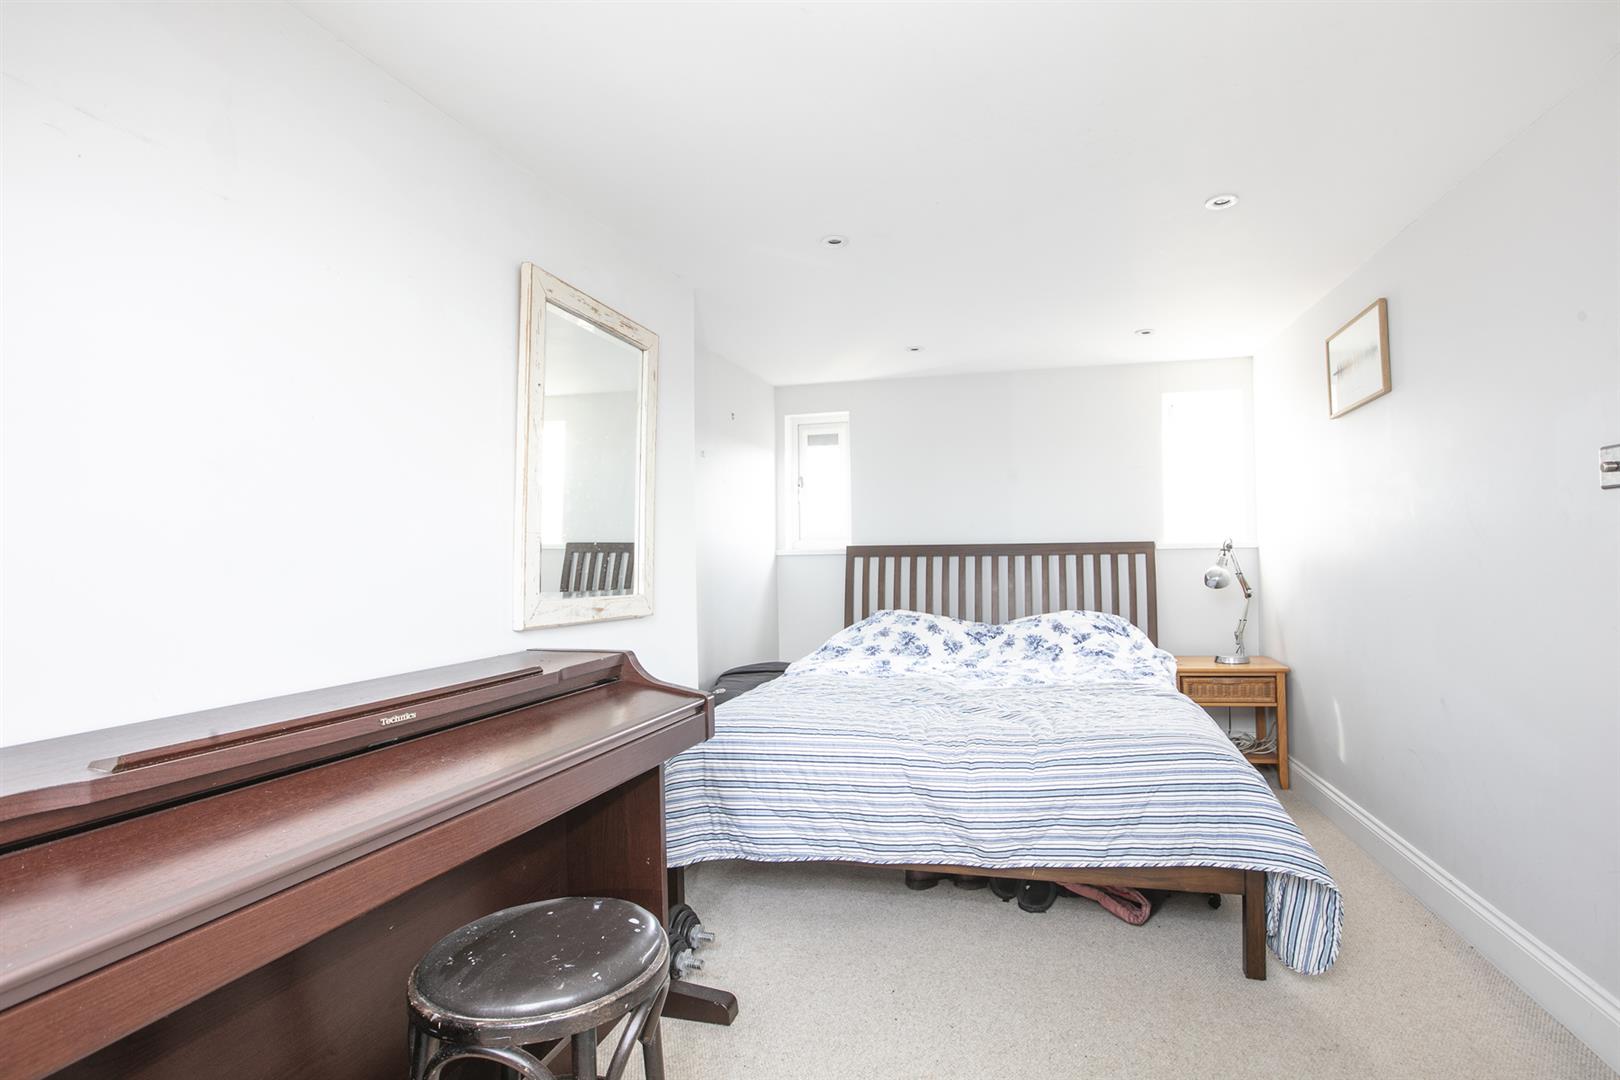 Flat - Conversion For Sale in Shenley Road, London, SE5 782 view6